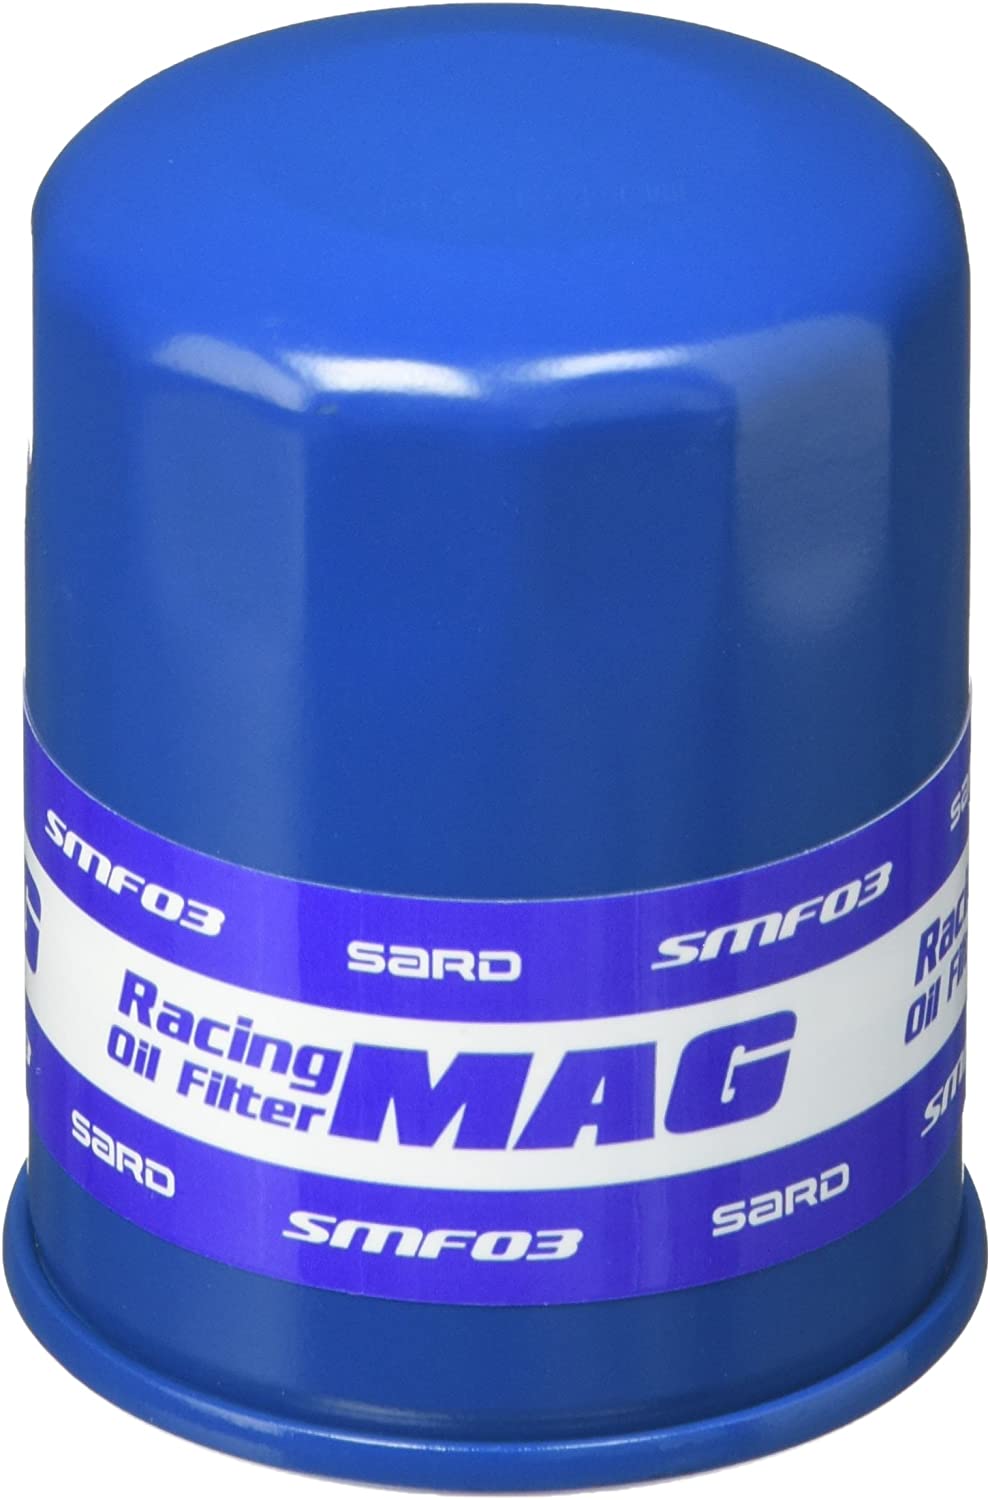 SARD RACING OIL FILTER For STORIA M101S M111S SMF00